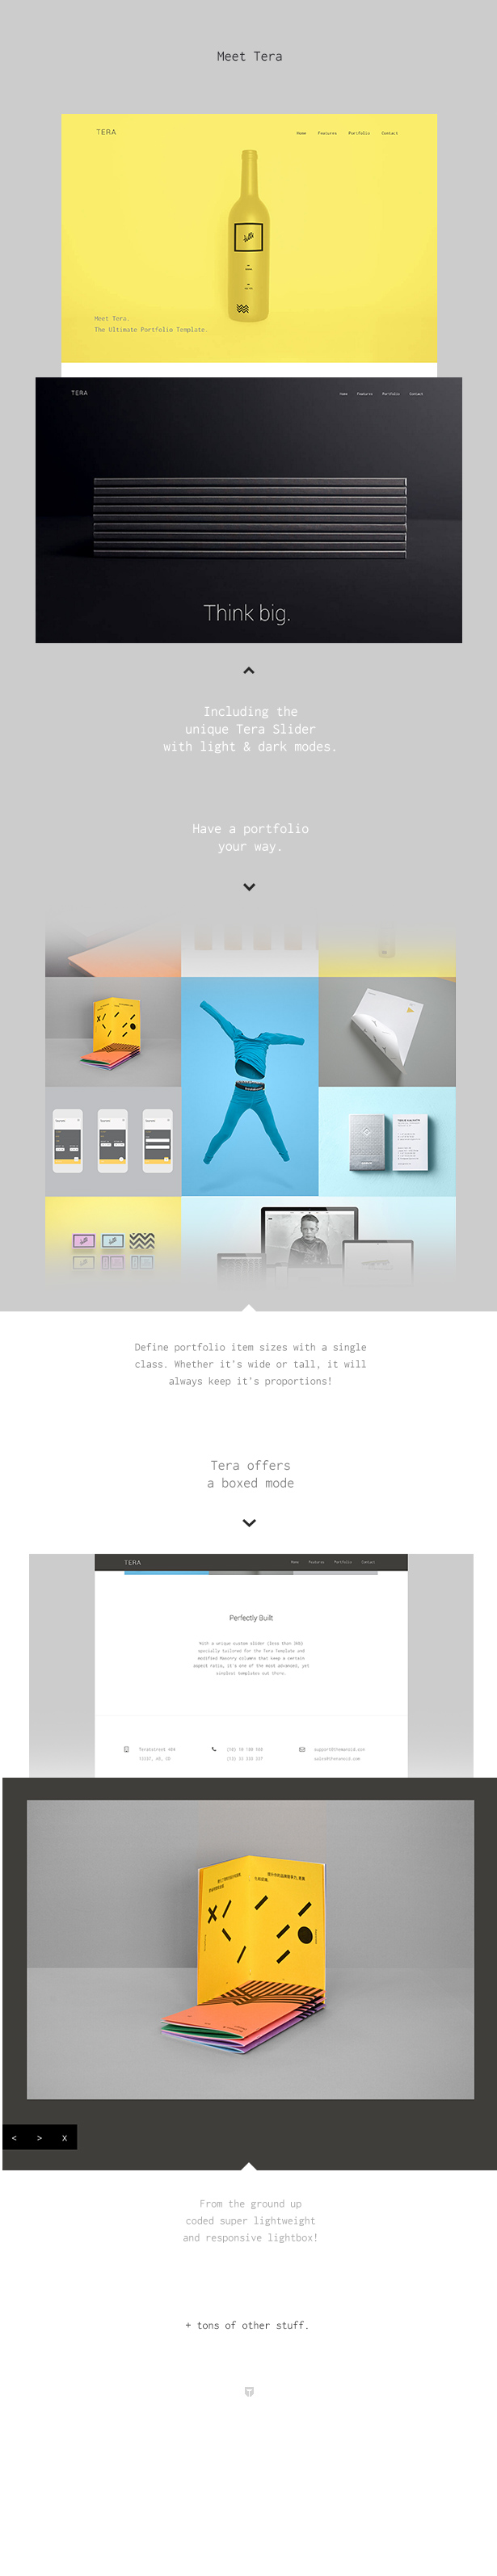 Tera - Responsive HTML5 Template for designers and photographers